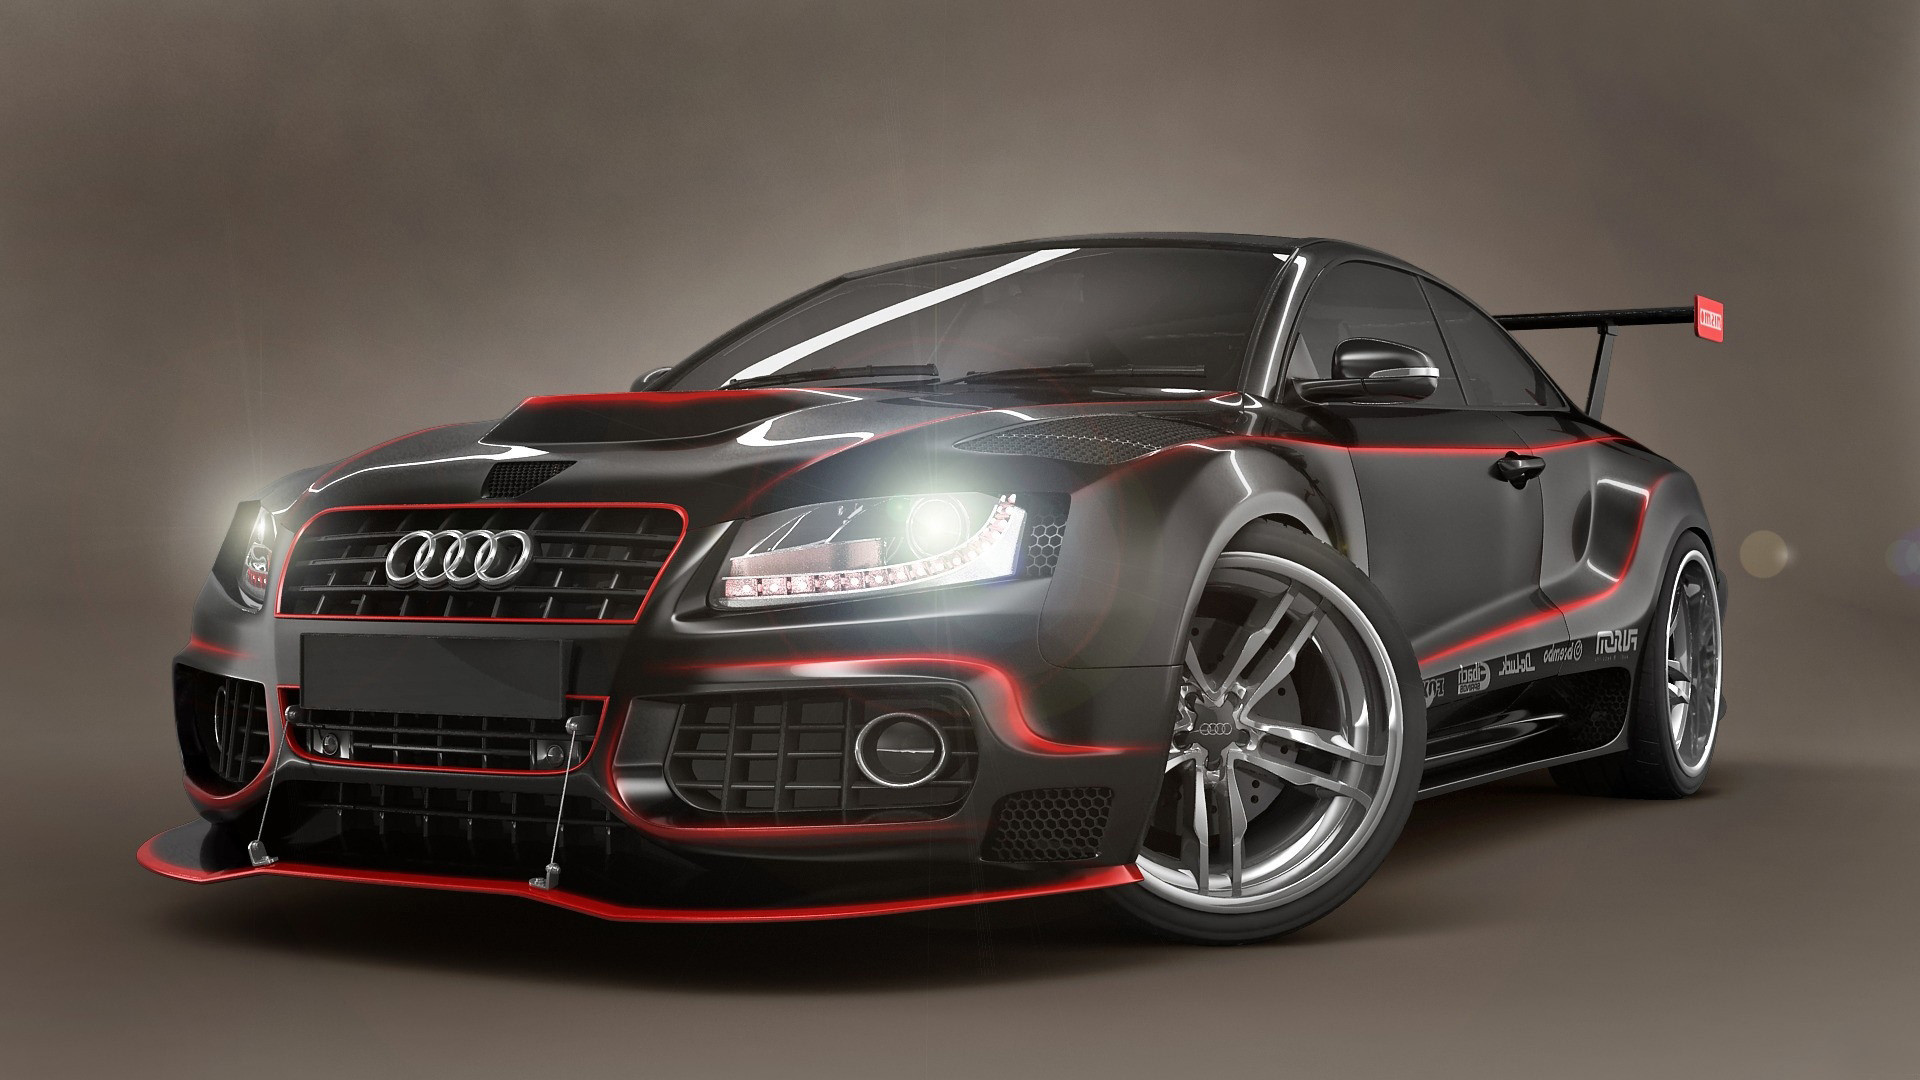 1920x1080 Audi Sports Car Wallpapers Mobile